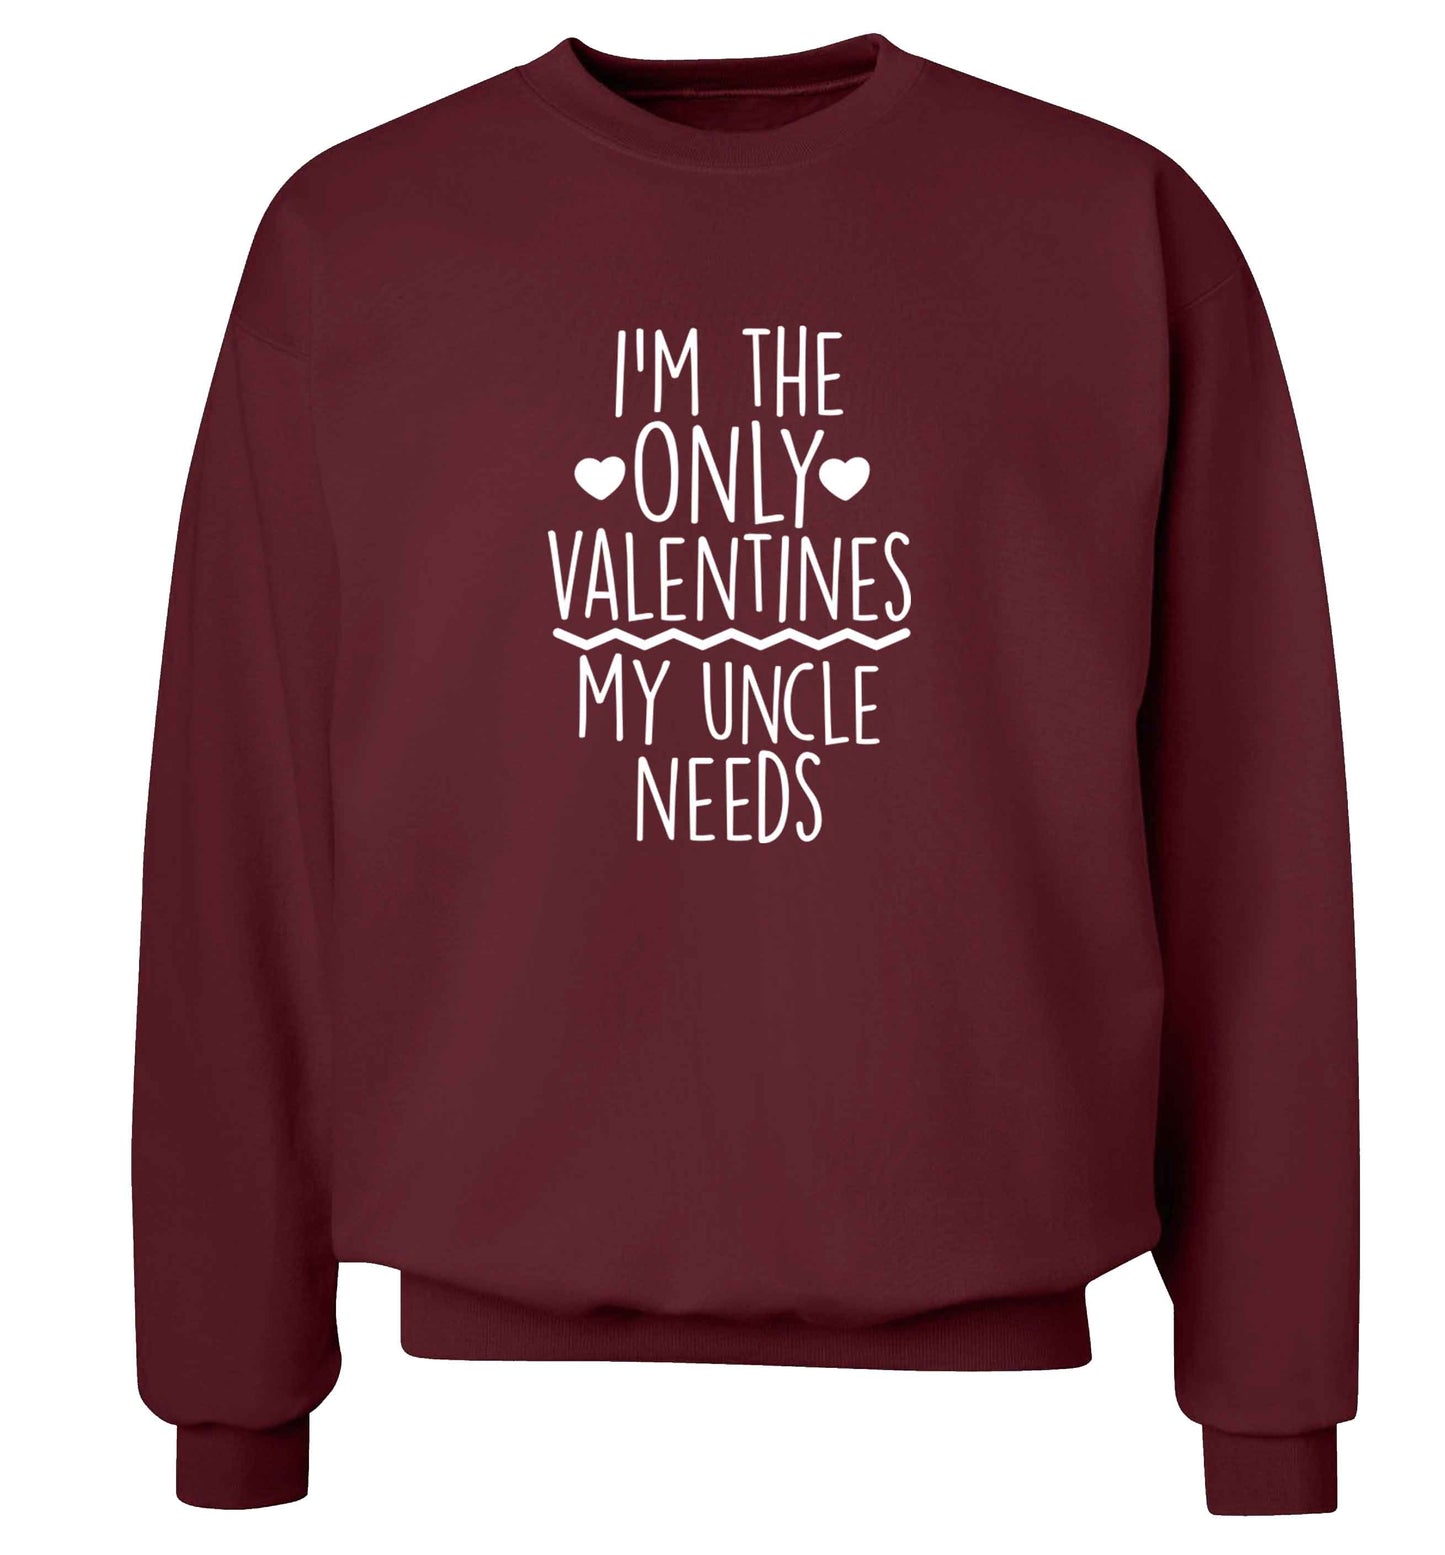 I'm the only valentines my uncle needs adult's unisex maroon sweater 2XL